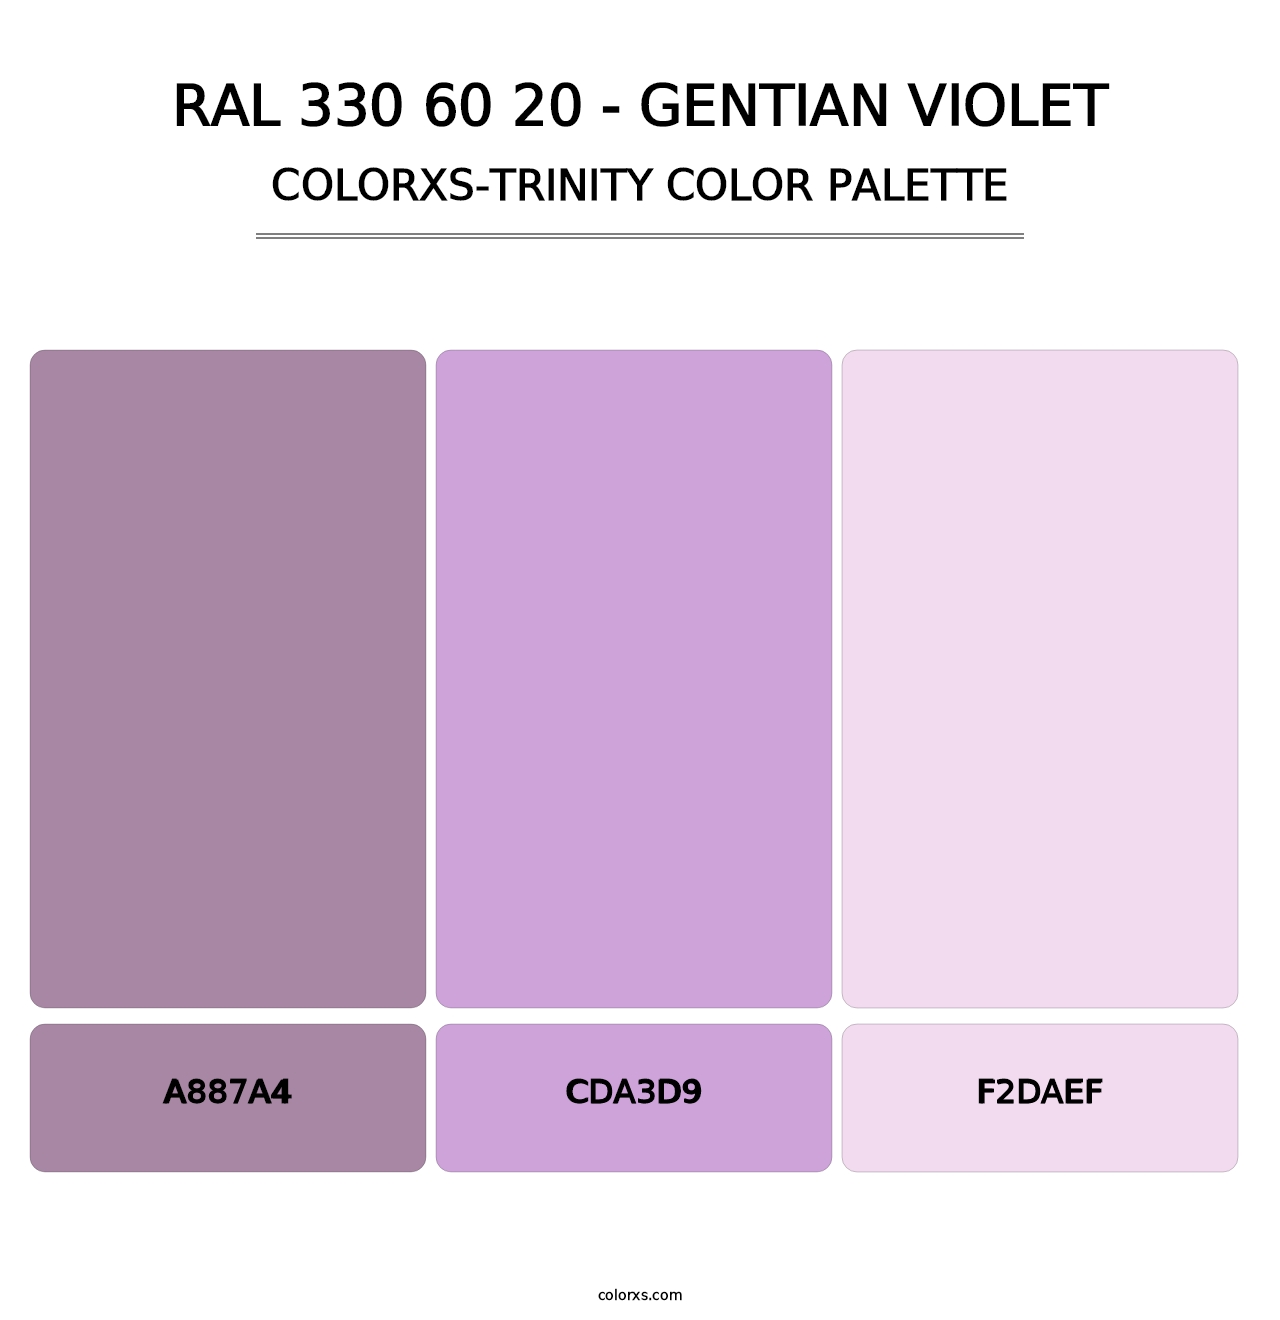 RAL 330 60 20 - Gentian Violet - Colorxs Trinity Palette